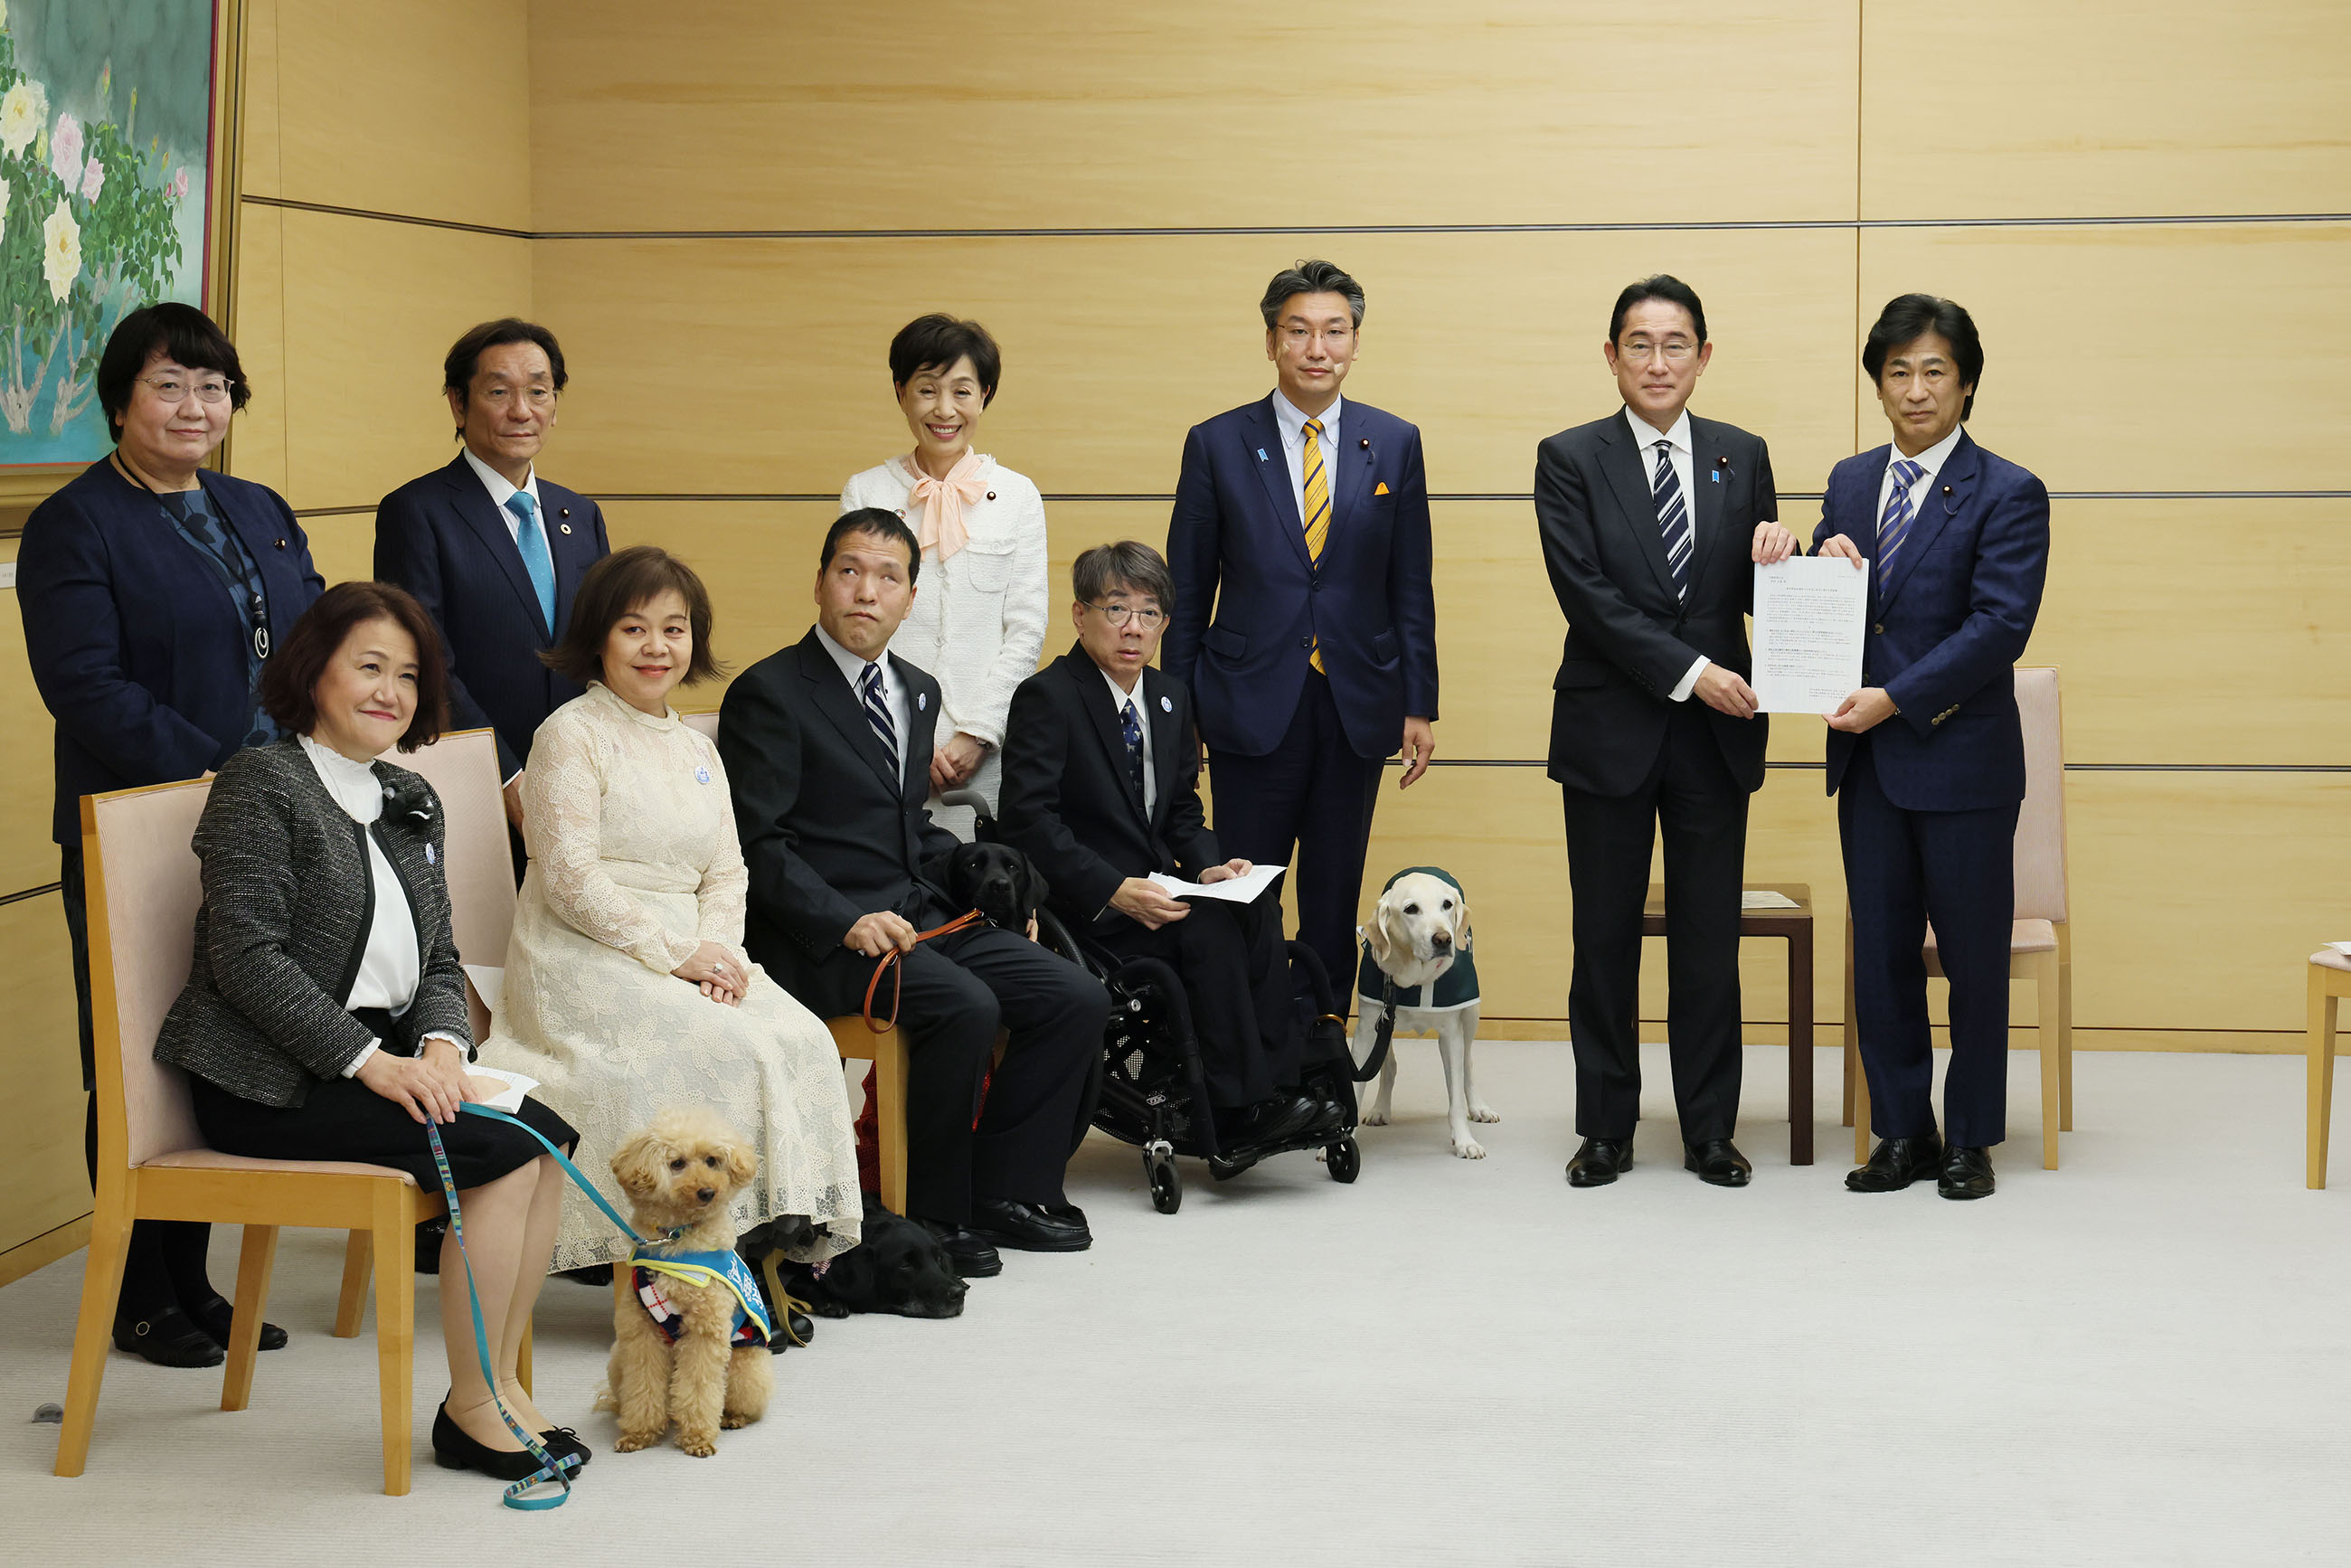 Courtesy Call from the Users of the Assistance Dogs for Persons with Physical Disabilities